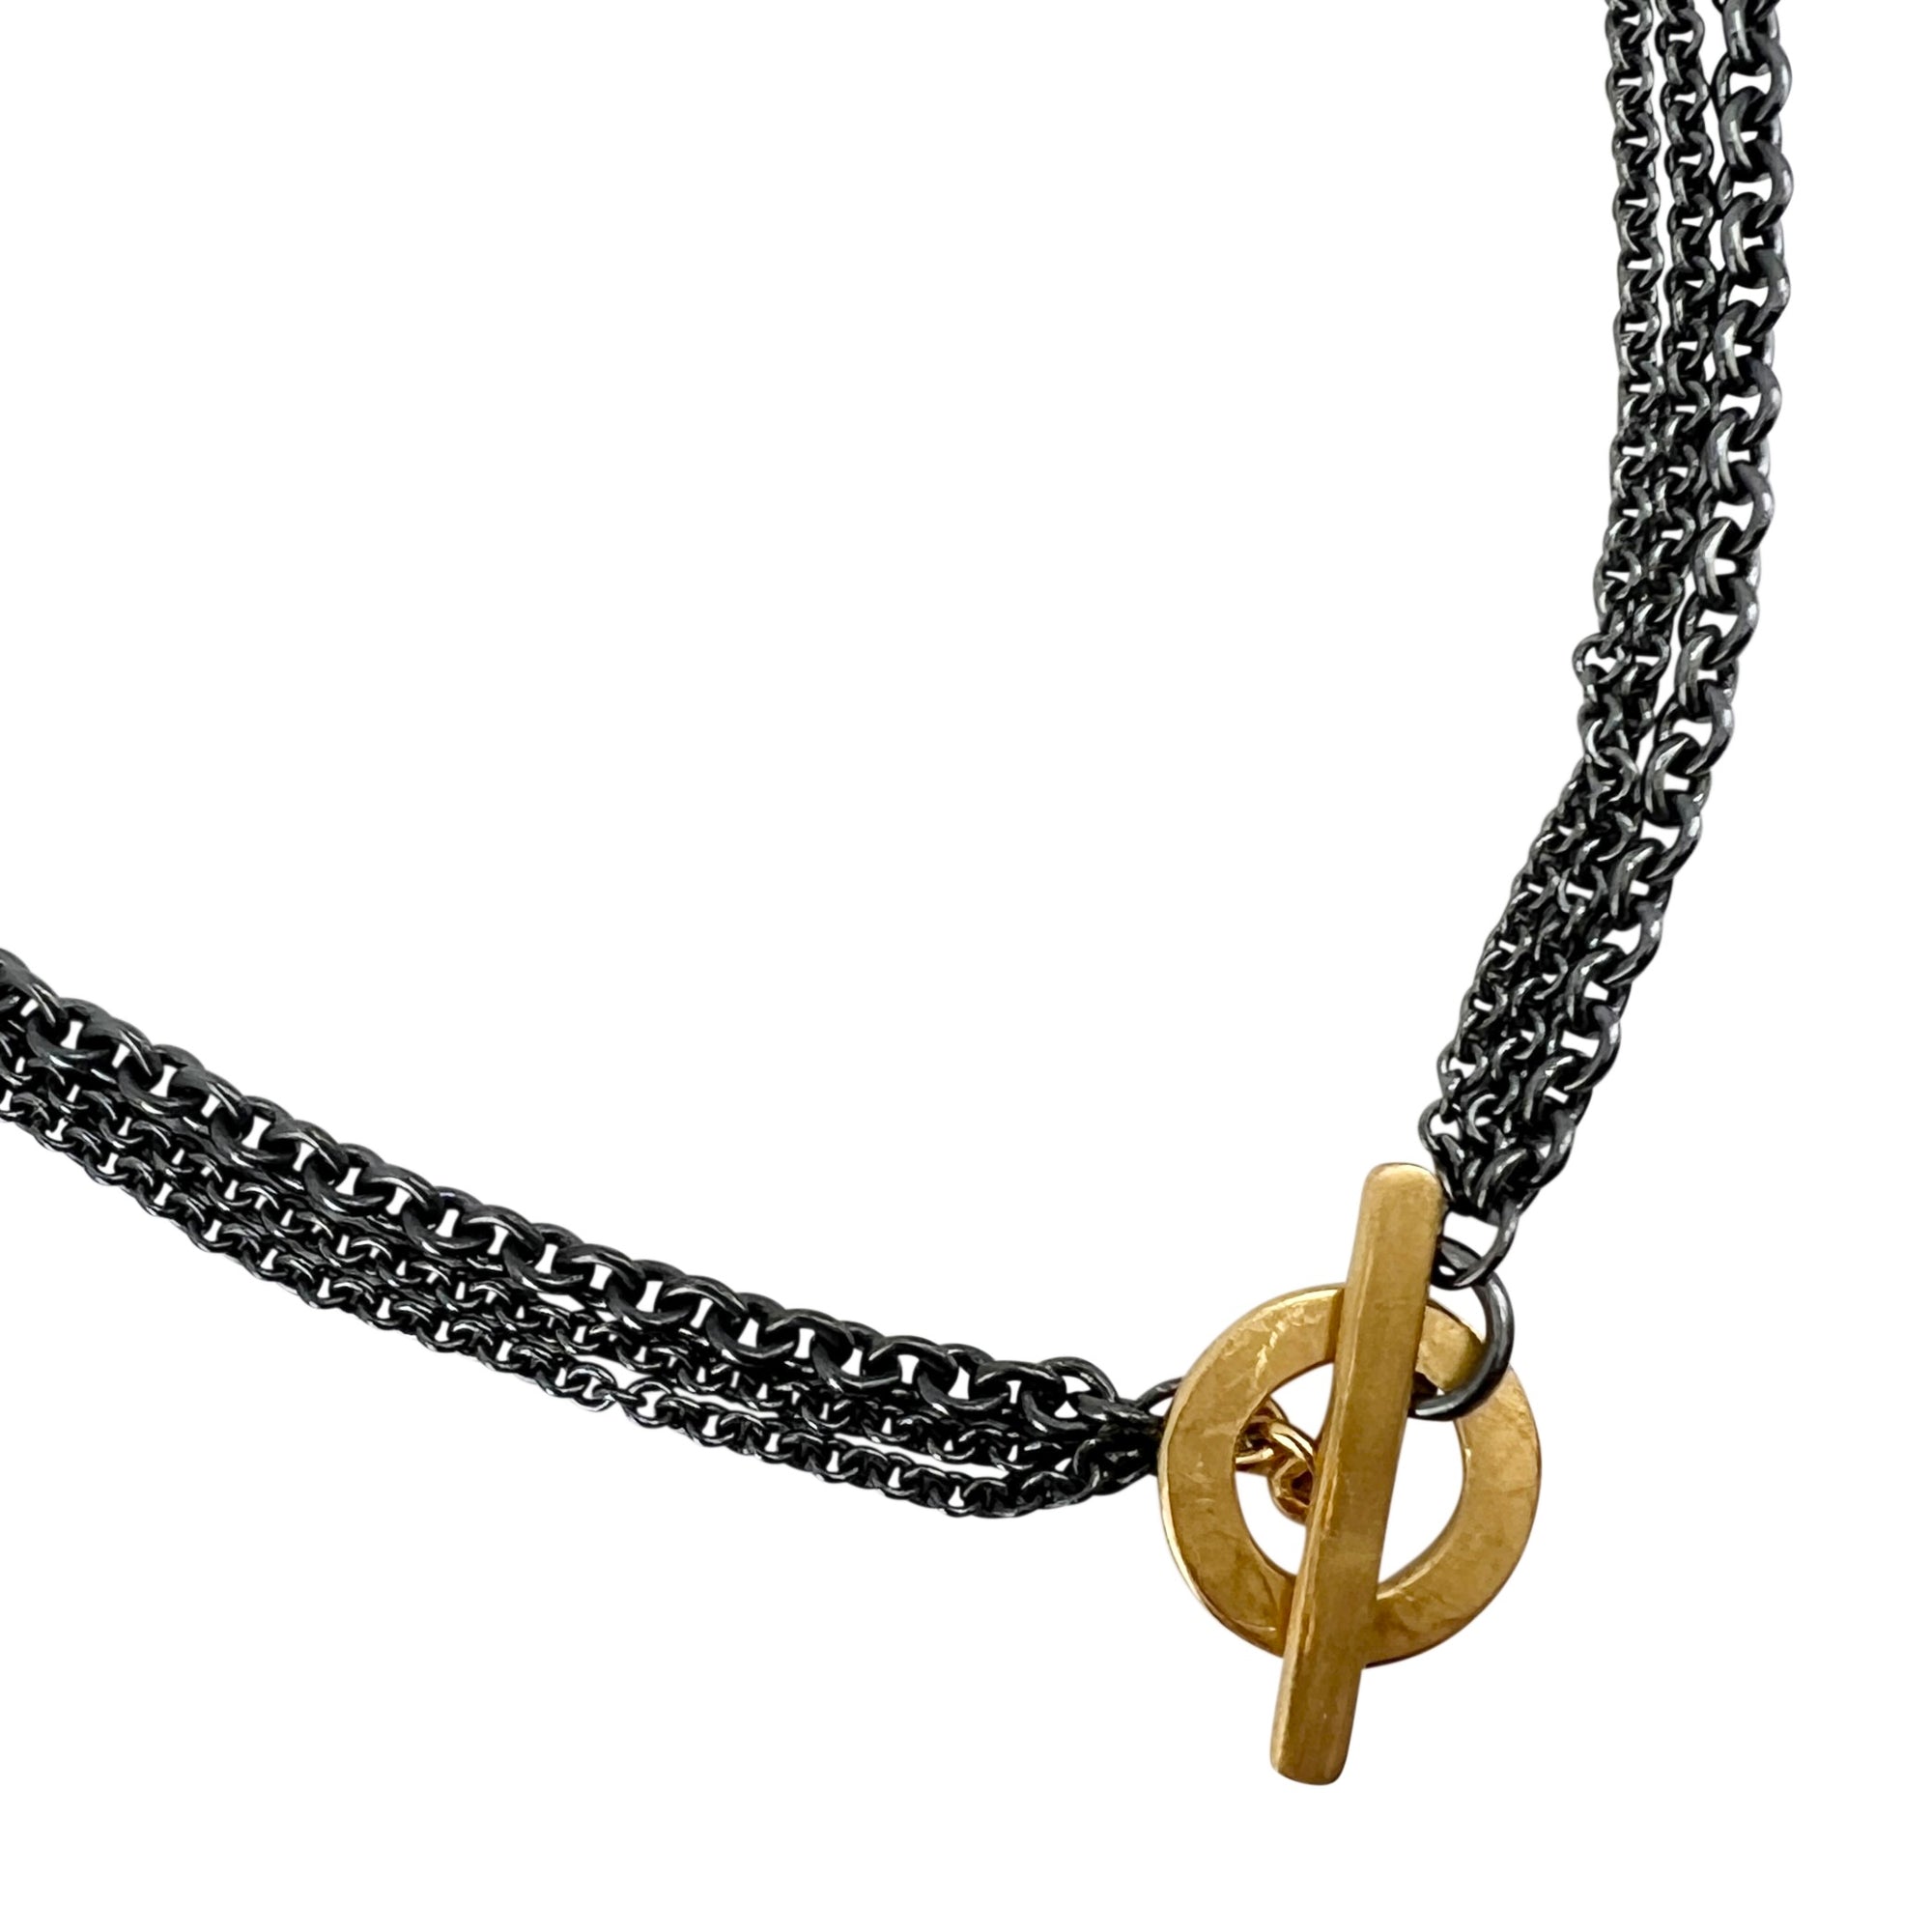 Triple sterling silver chain oxidized with Vermeil toggle clasp